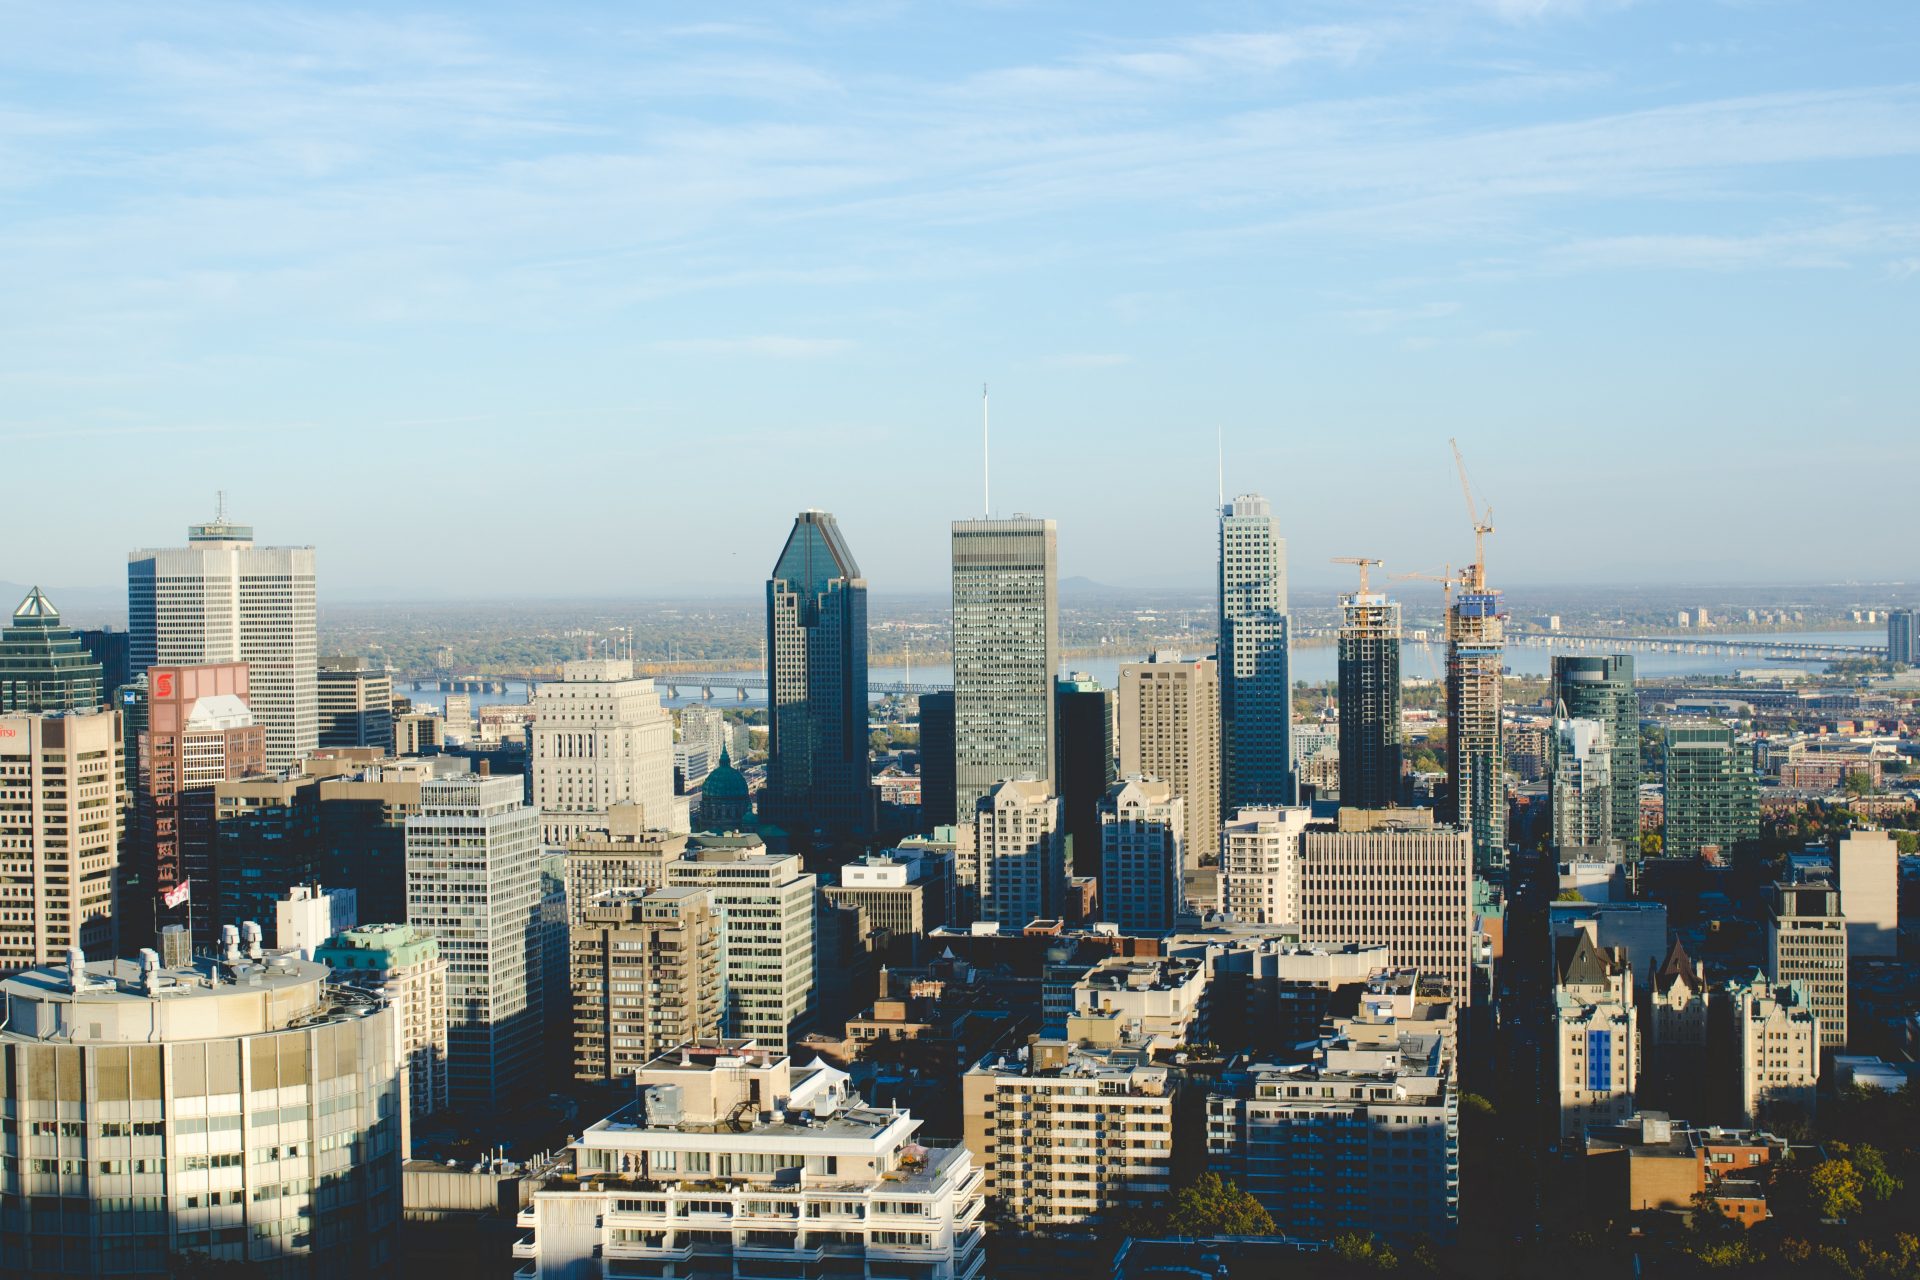 17. Montreal, Canada